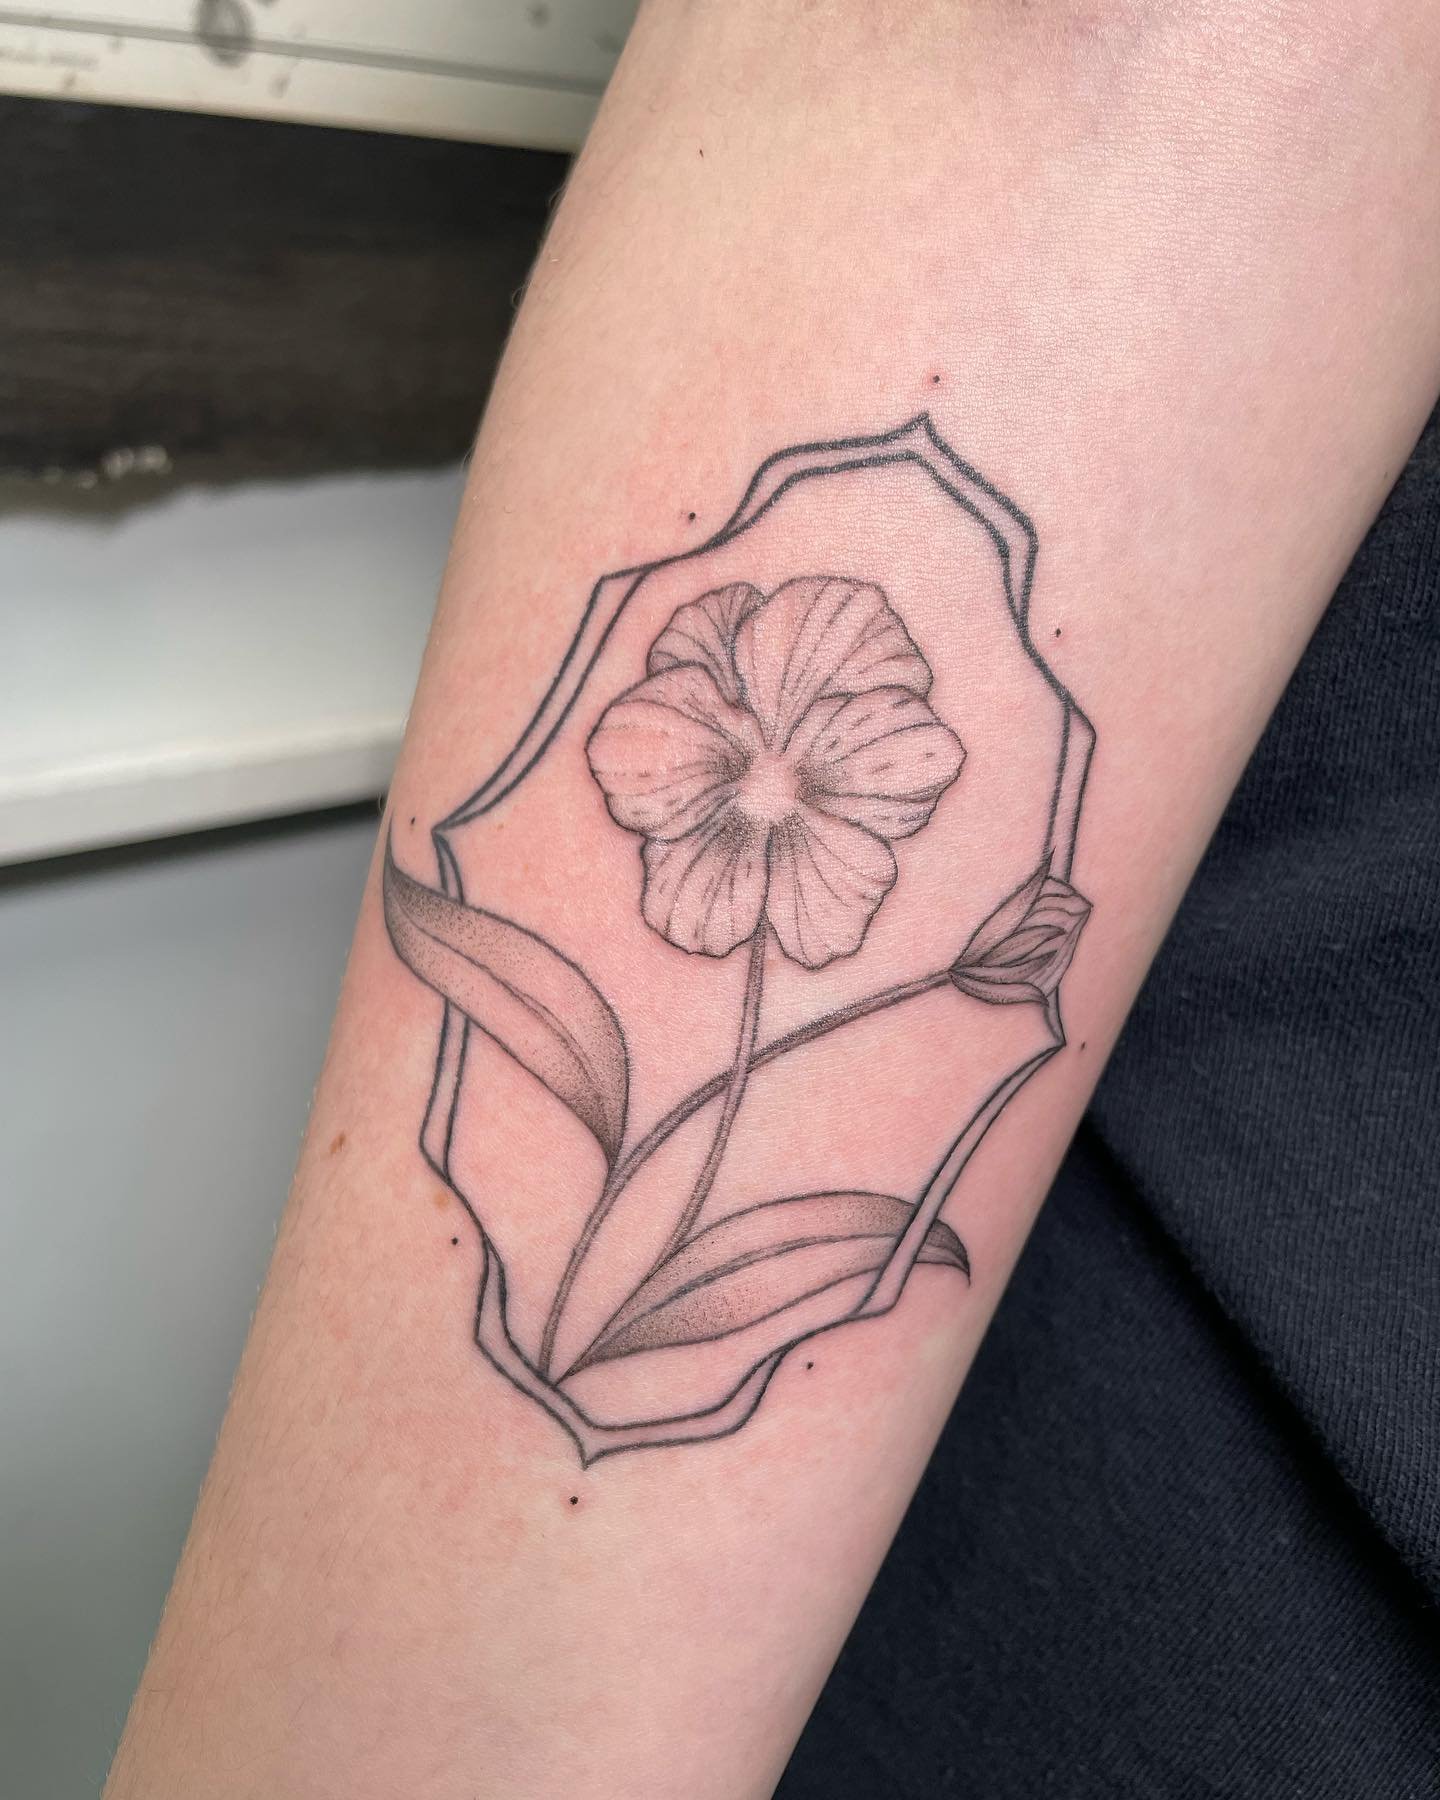 Loved seeing this healed and settled ; added some shading and a few minor touchups! Thank you always Mik 🌟💖 #finelinetattoo #artdecotattoo #pansytattoo